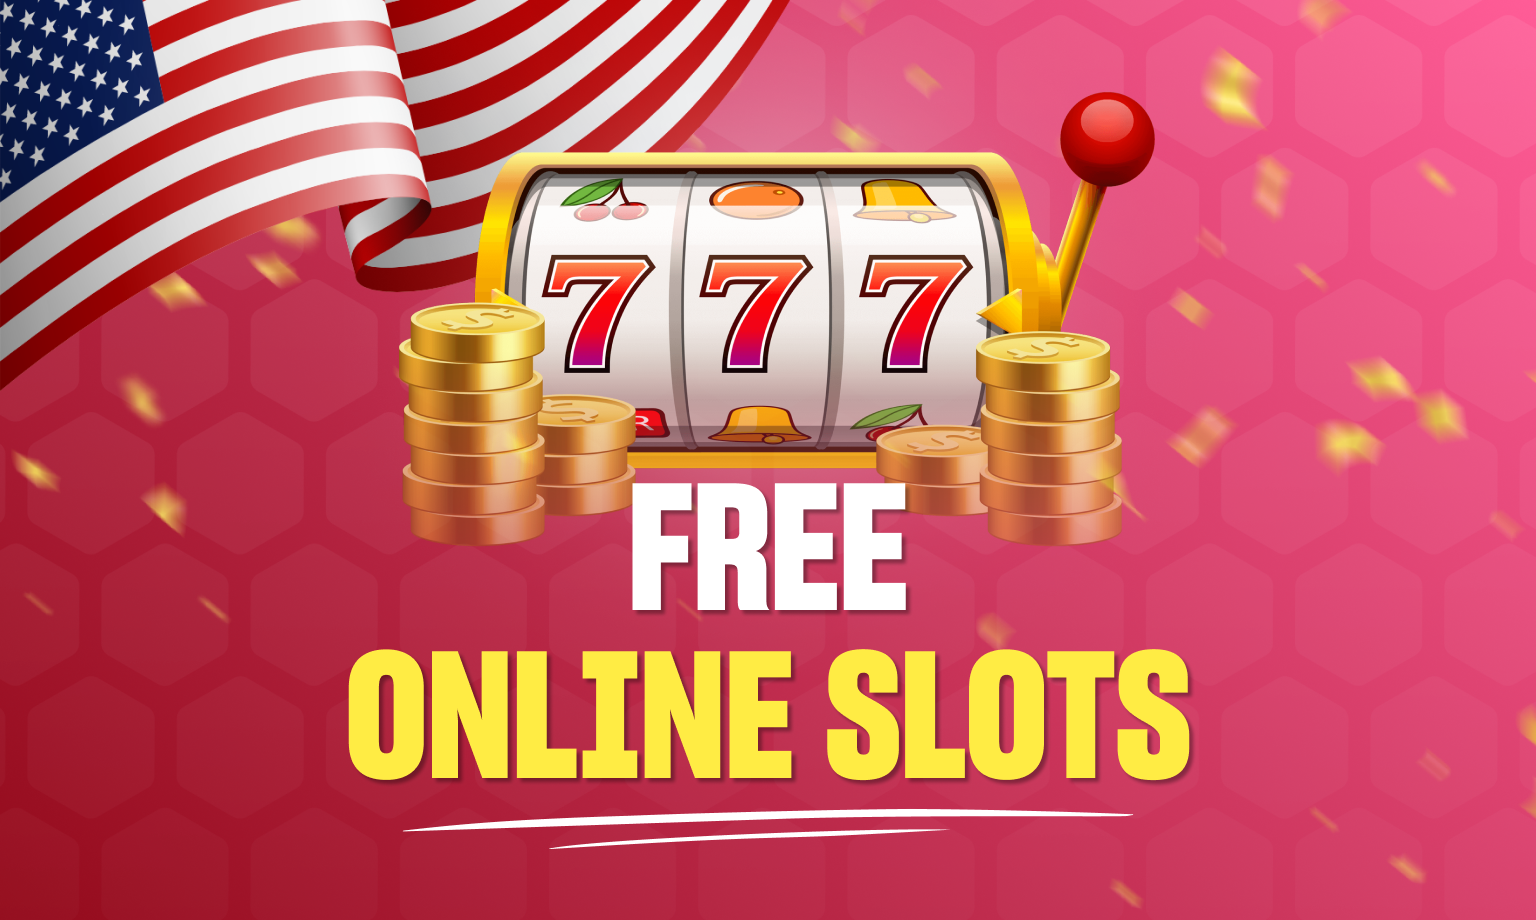 Casino Slots Free No Download No Registration: How to Play and Win Big Casino Strategies